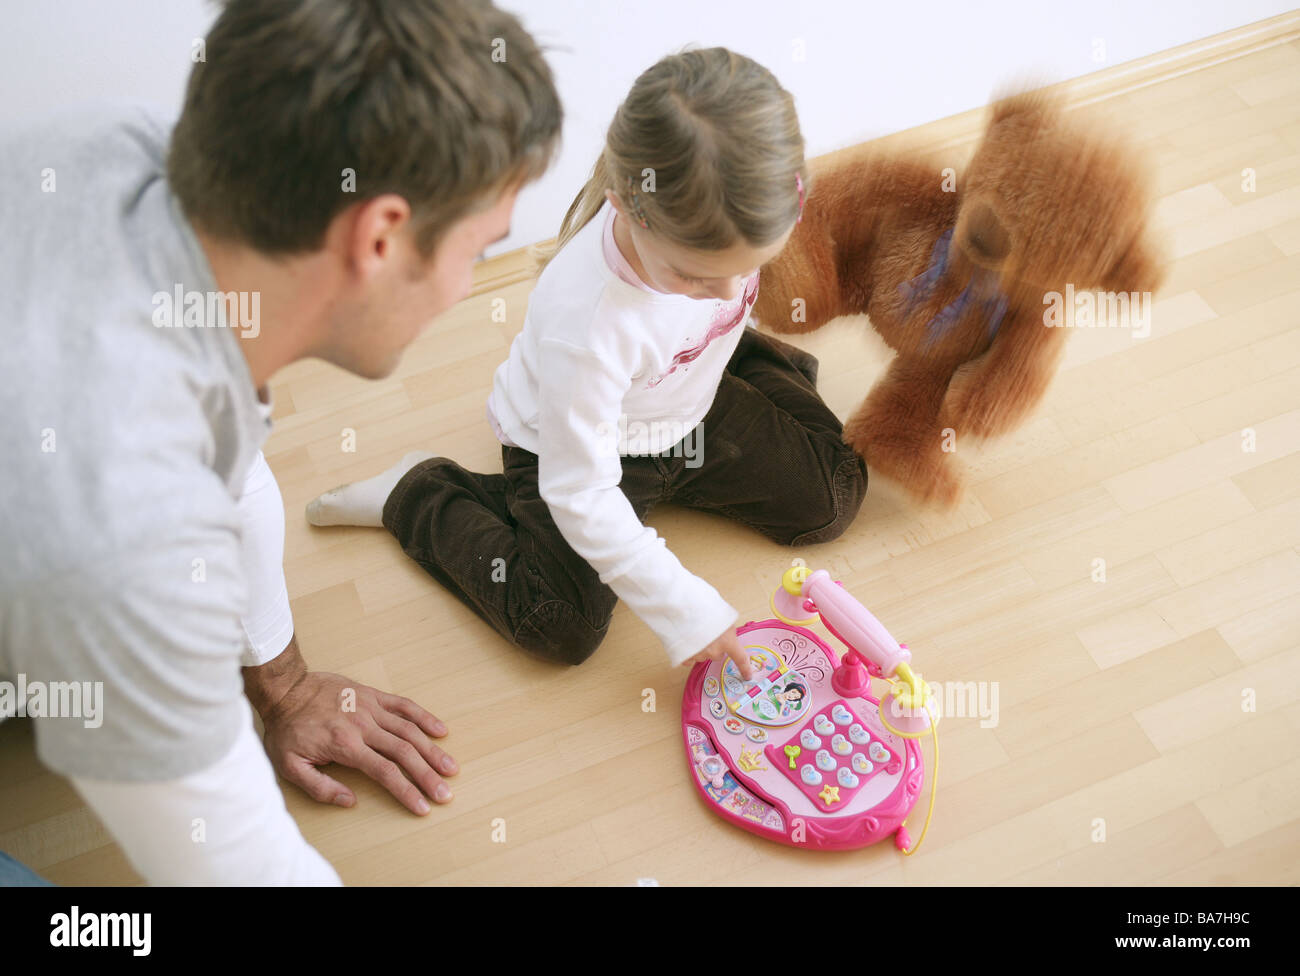 Father and daughter (3-4 years) playing with a toy phone and a teddy bear, Munich, Germany Stock Photo